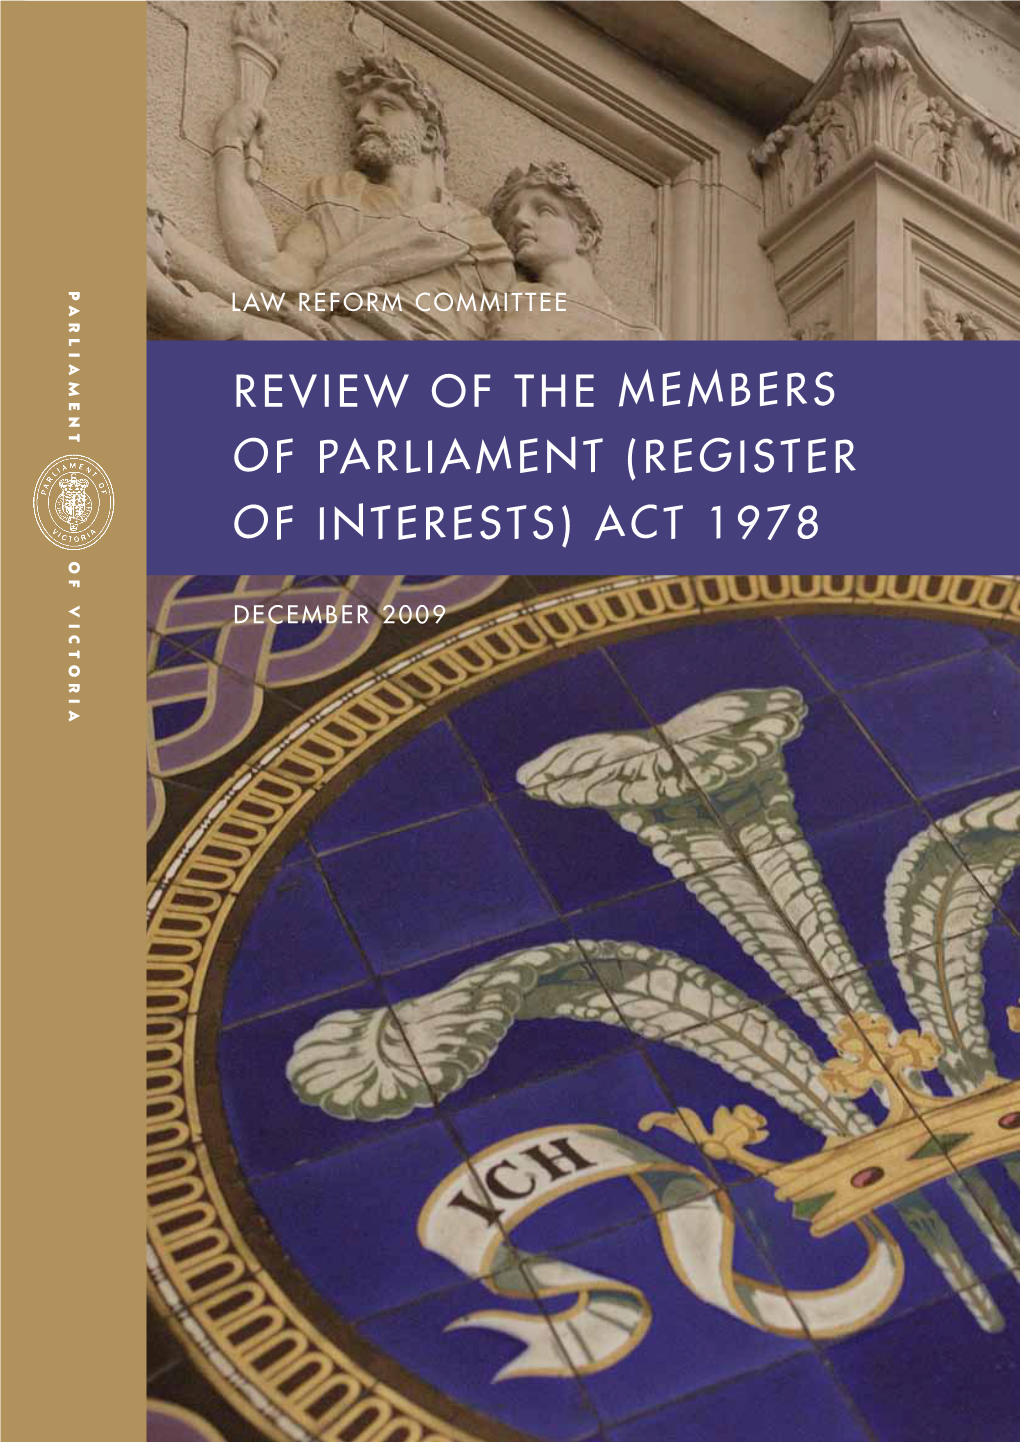 Review of the Members of Parliament (Register of Interests) Act 1978